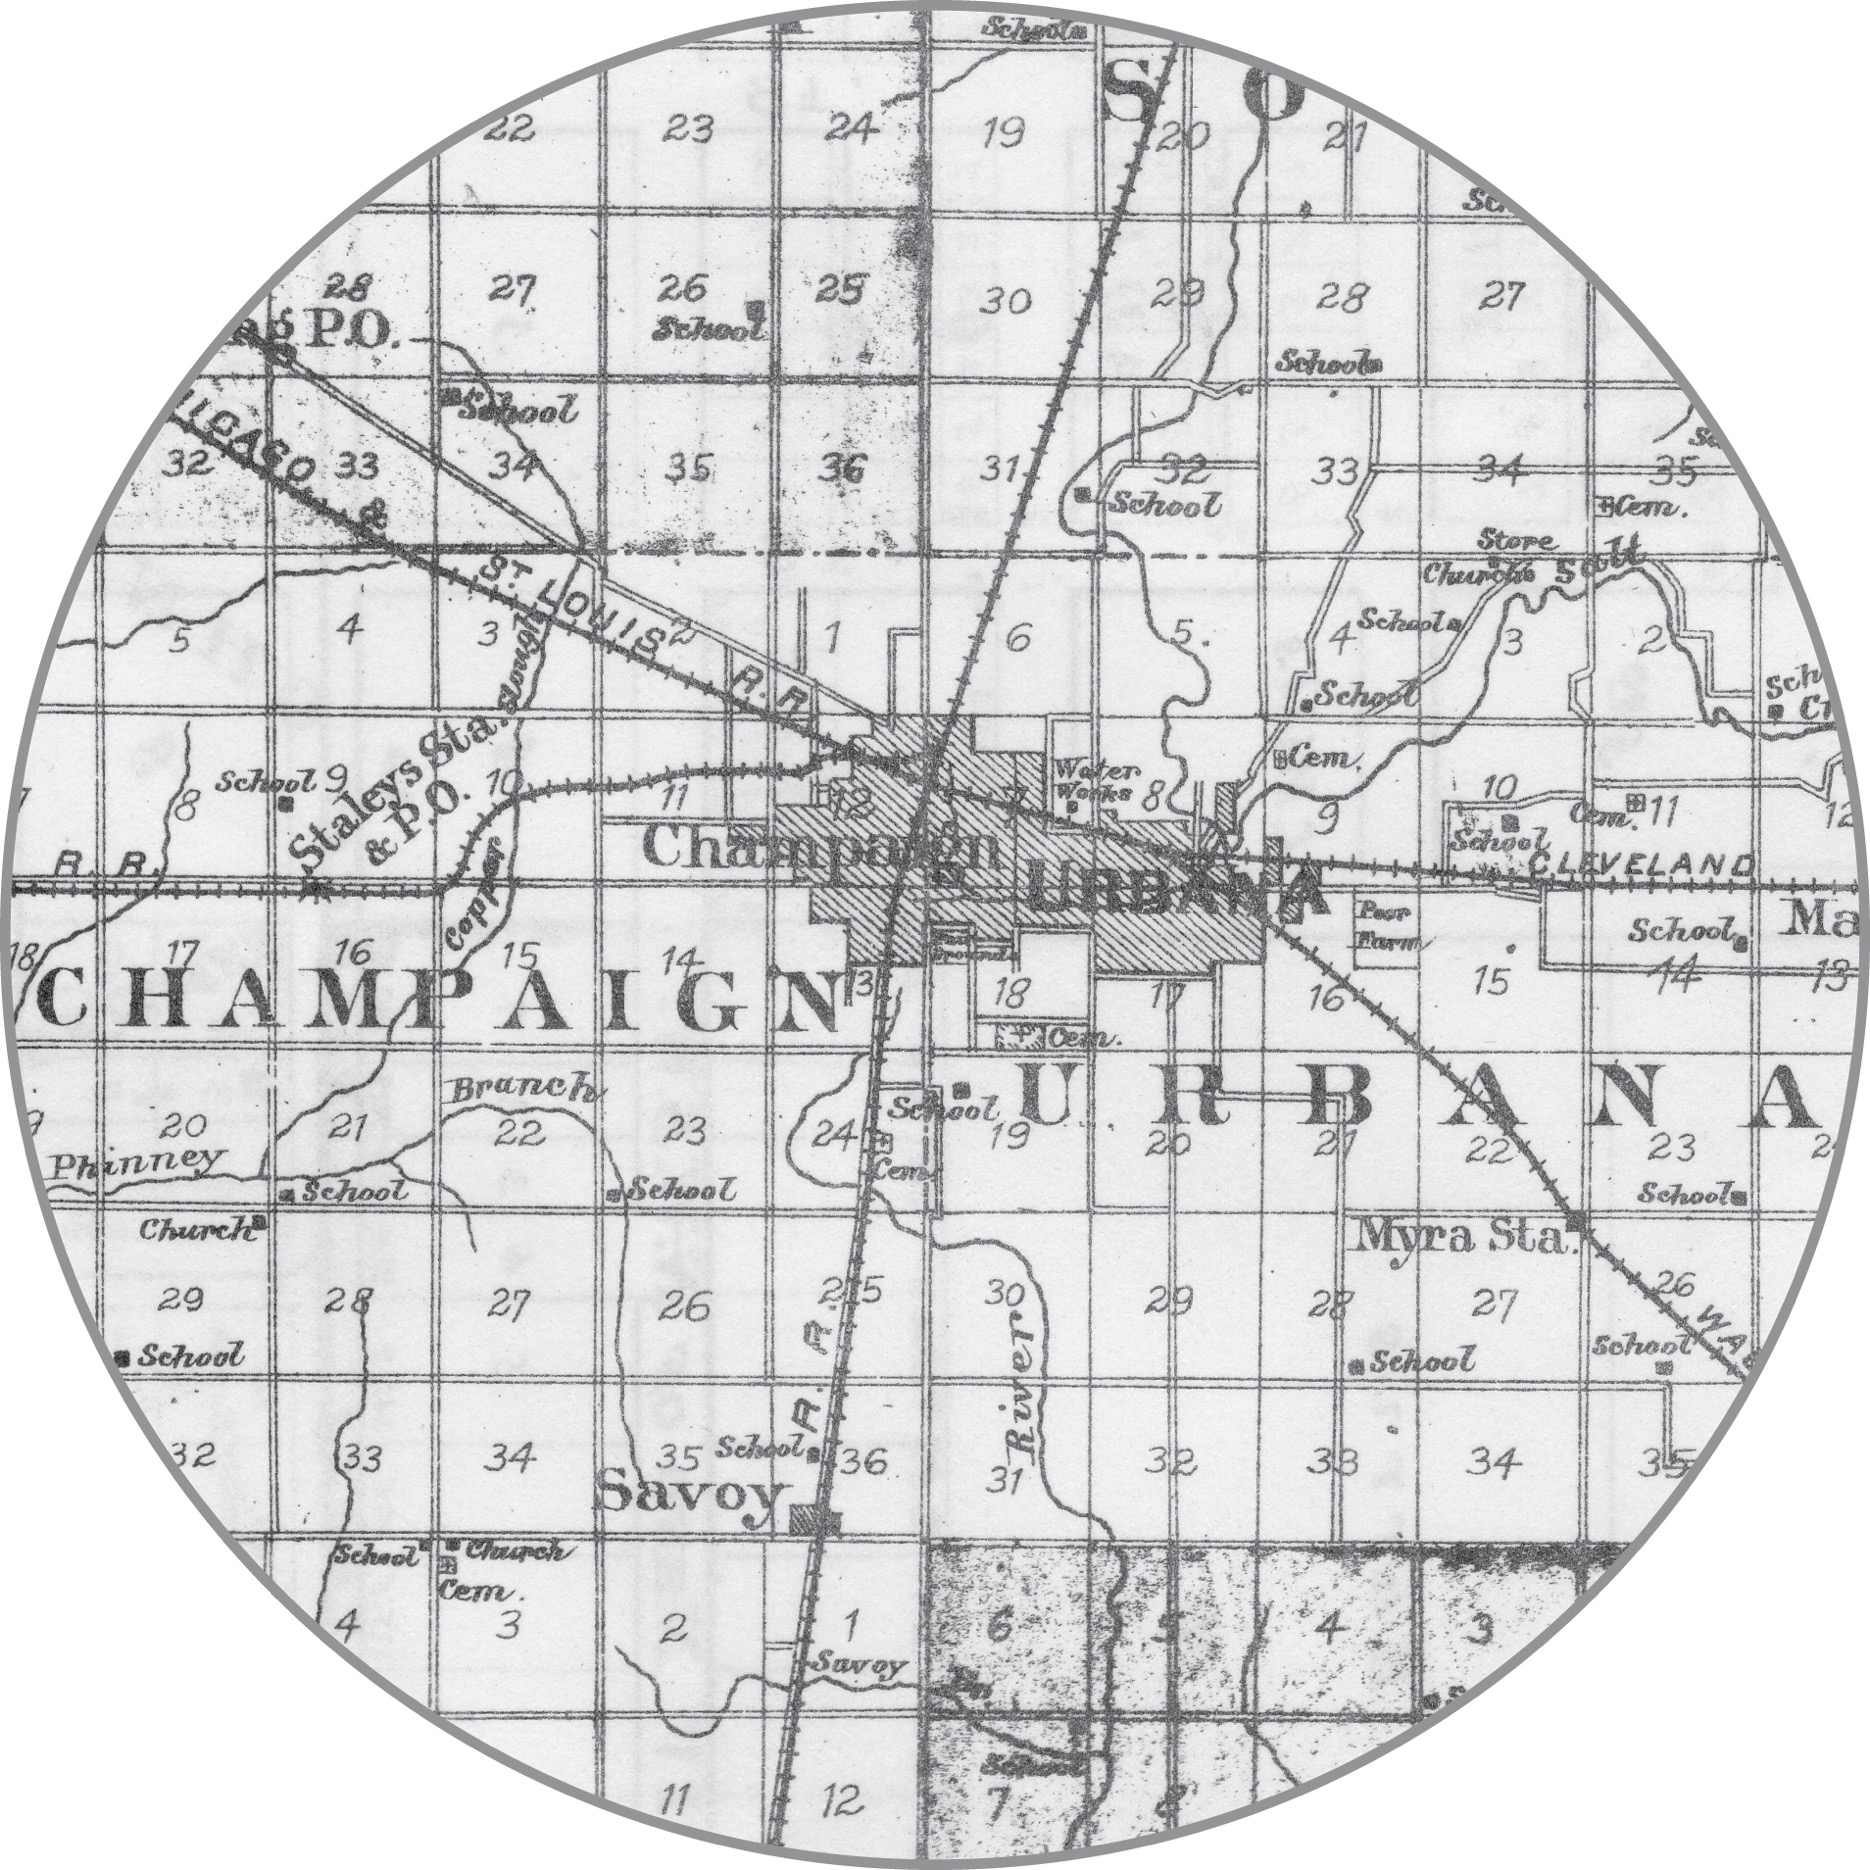 Bottom circle West Urbana later renamed Champaign grew on the outskirts of - photo 7